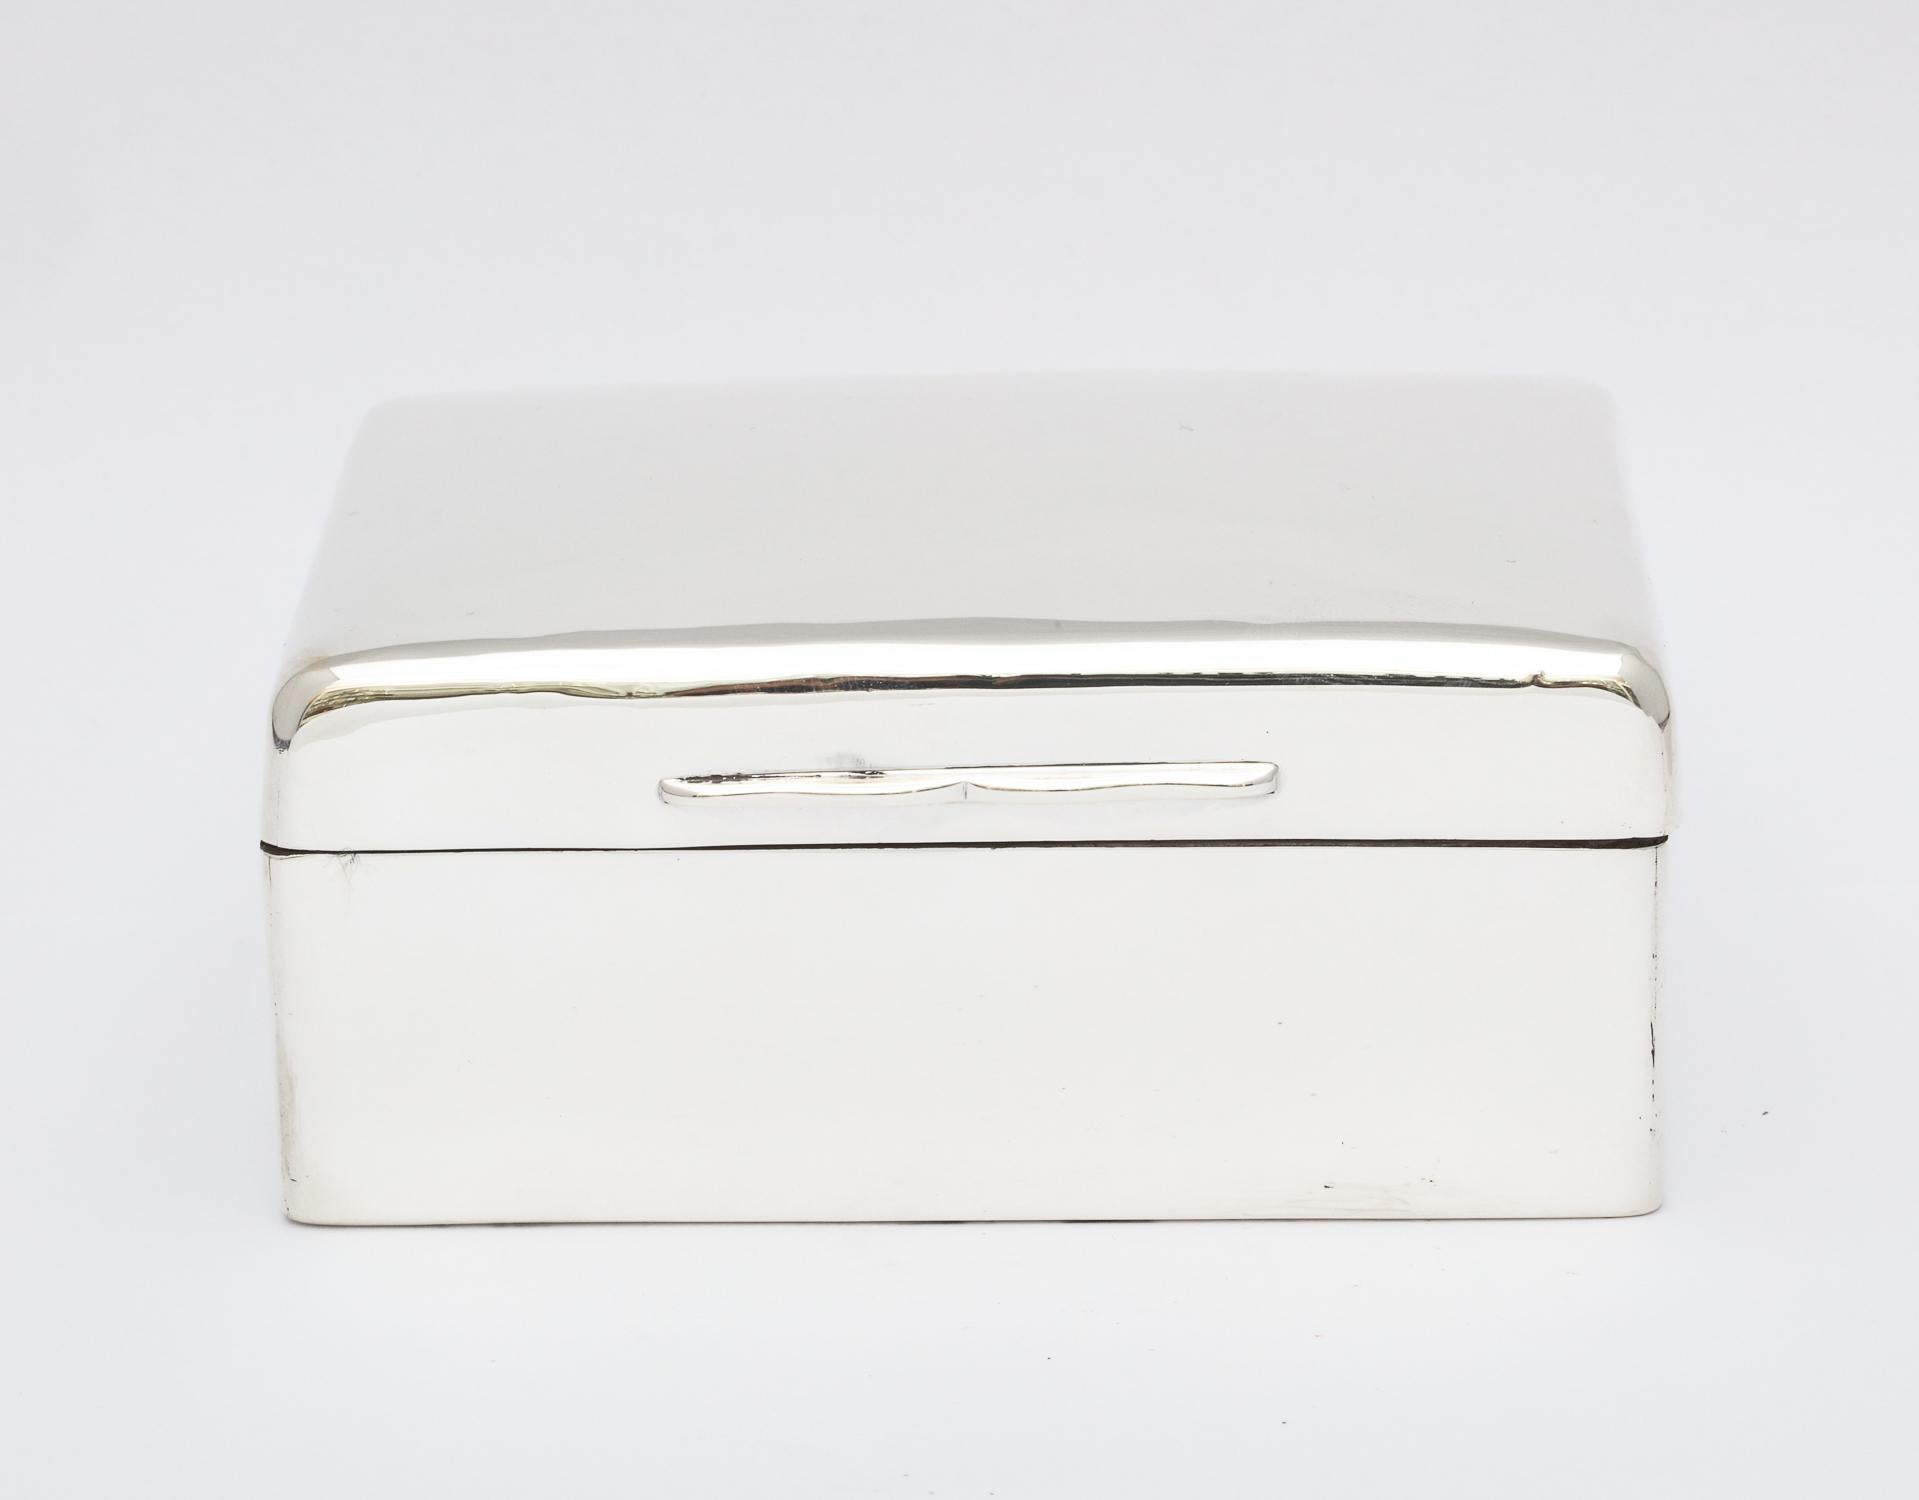 Sterling silver, Anglo-Indian (made for the Indian market) table box, London, 1915, Blackmore and Fletcher, Ltd. - makers. Retailed at Lahore, India. Hinged lid. Wood lined. Leather underside. Measures: 4 1/2 inches wide x 3 1/2 inches deep x 2